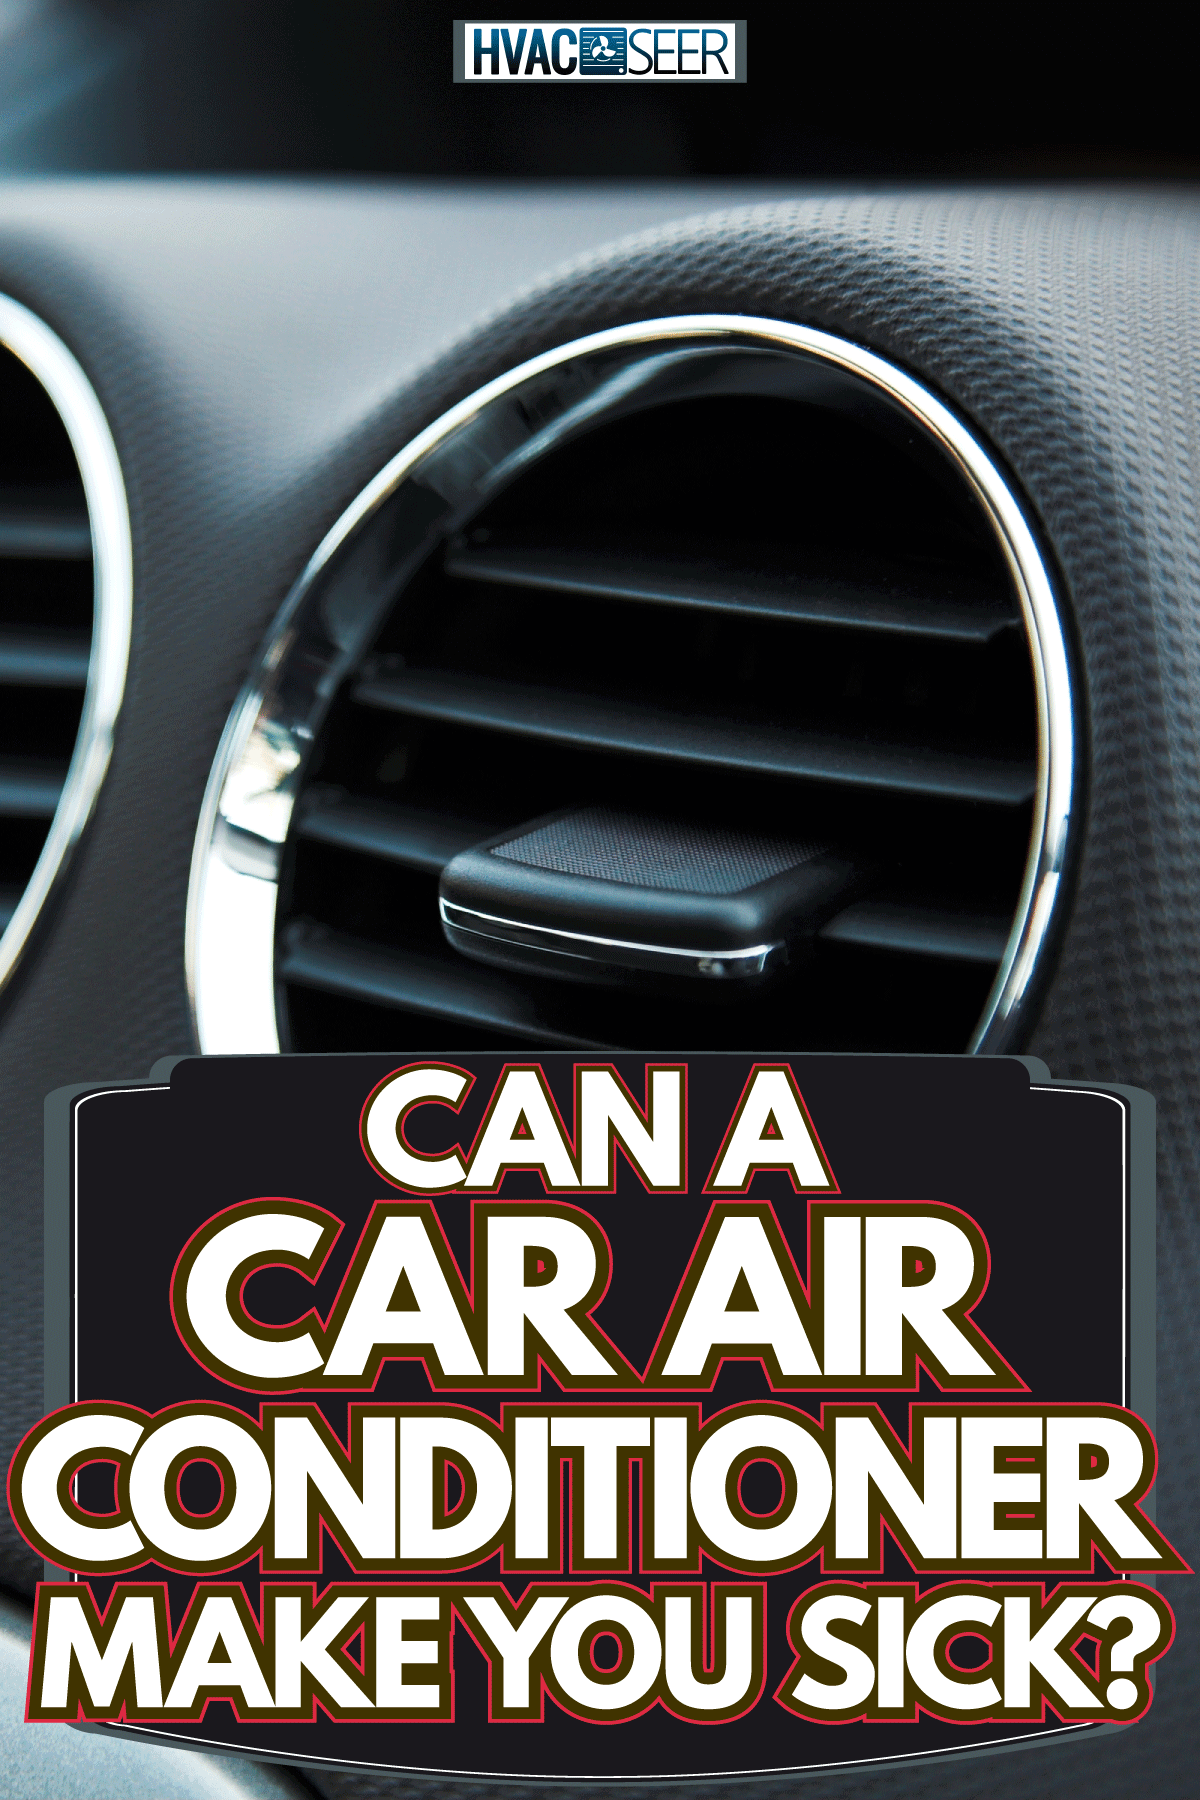 Car air conditioning outlets, Can A Car Air Conditioner Make You Sick?